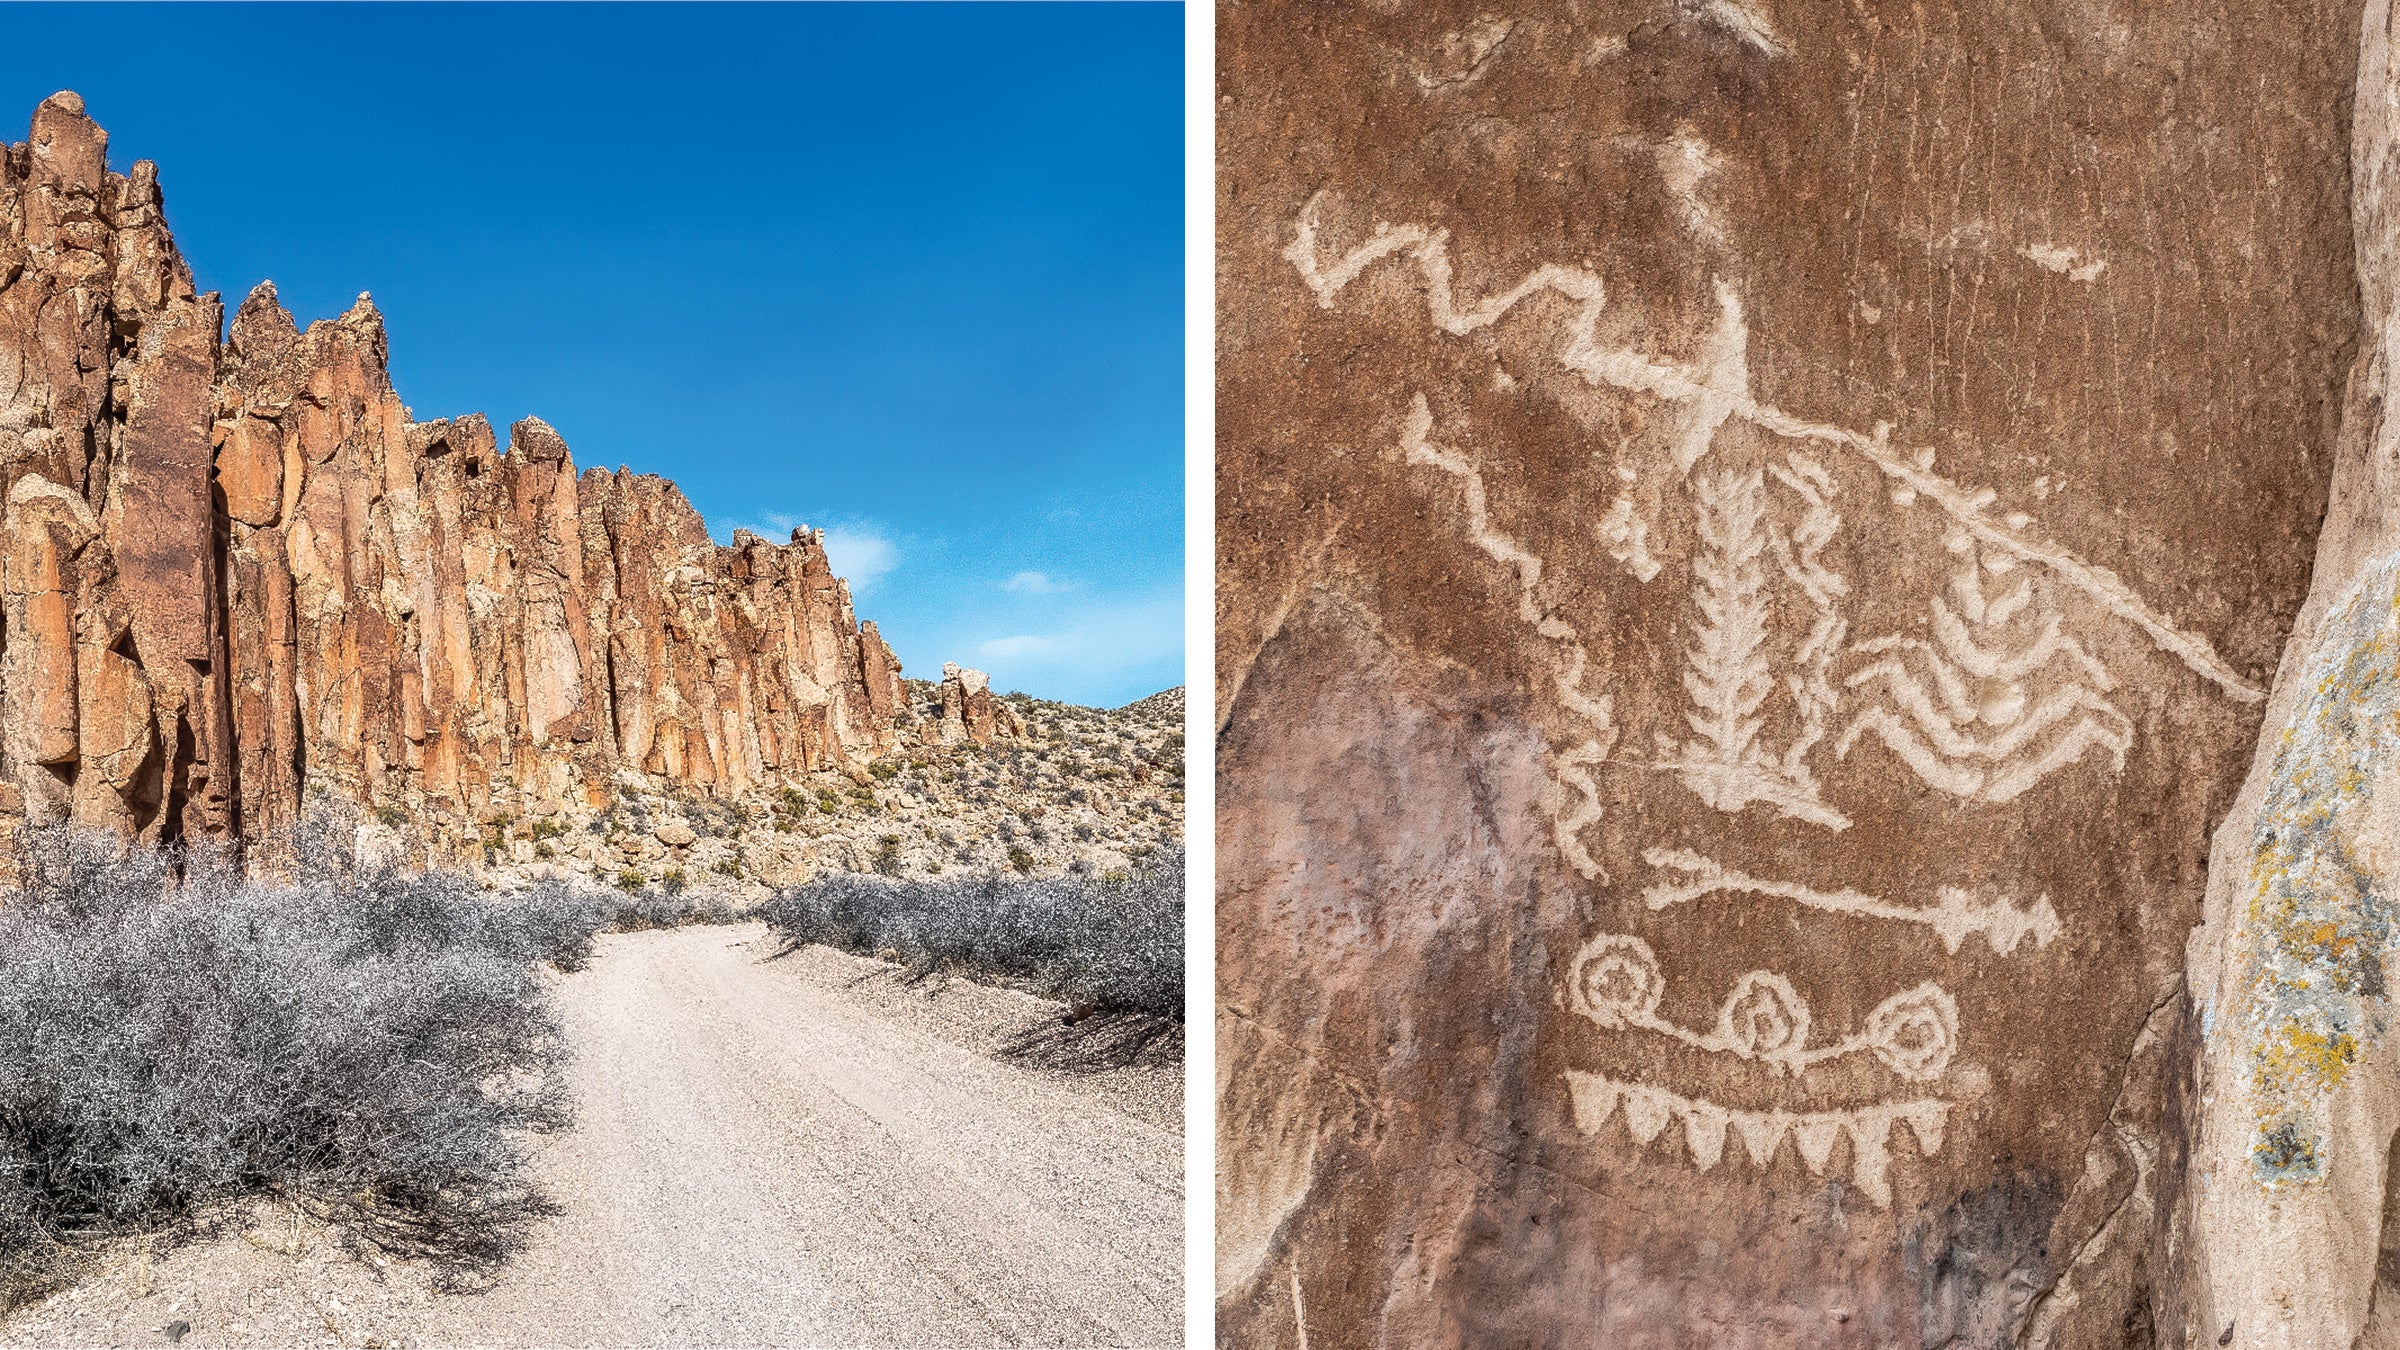 A petroglyph and wild terrain in Basin and Range National Monument